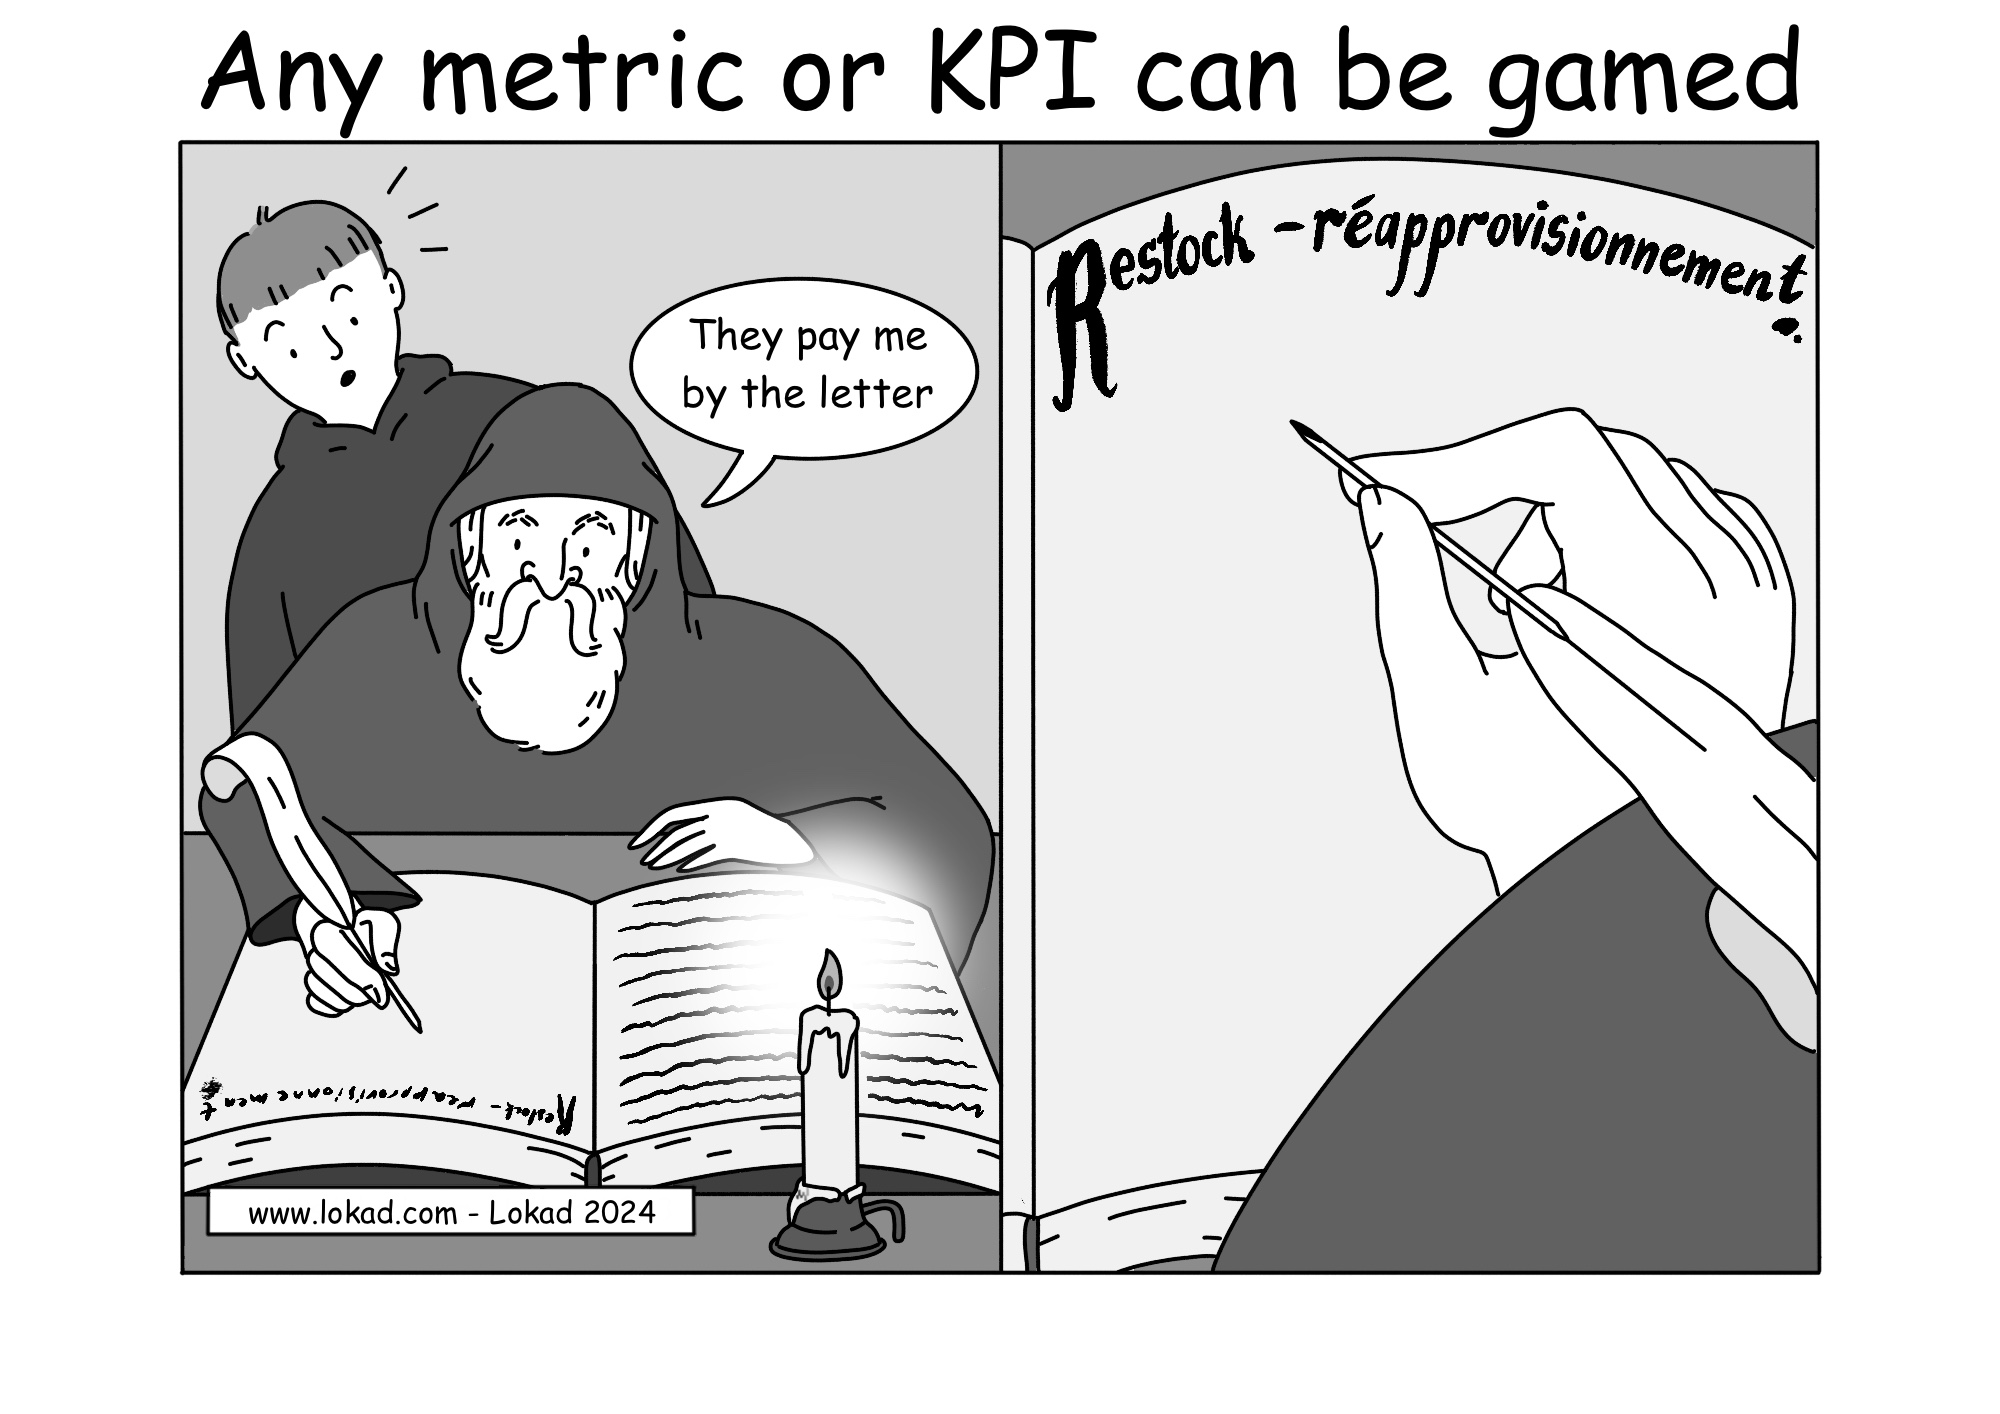 Any metric or KPI can be gamed.